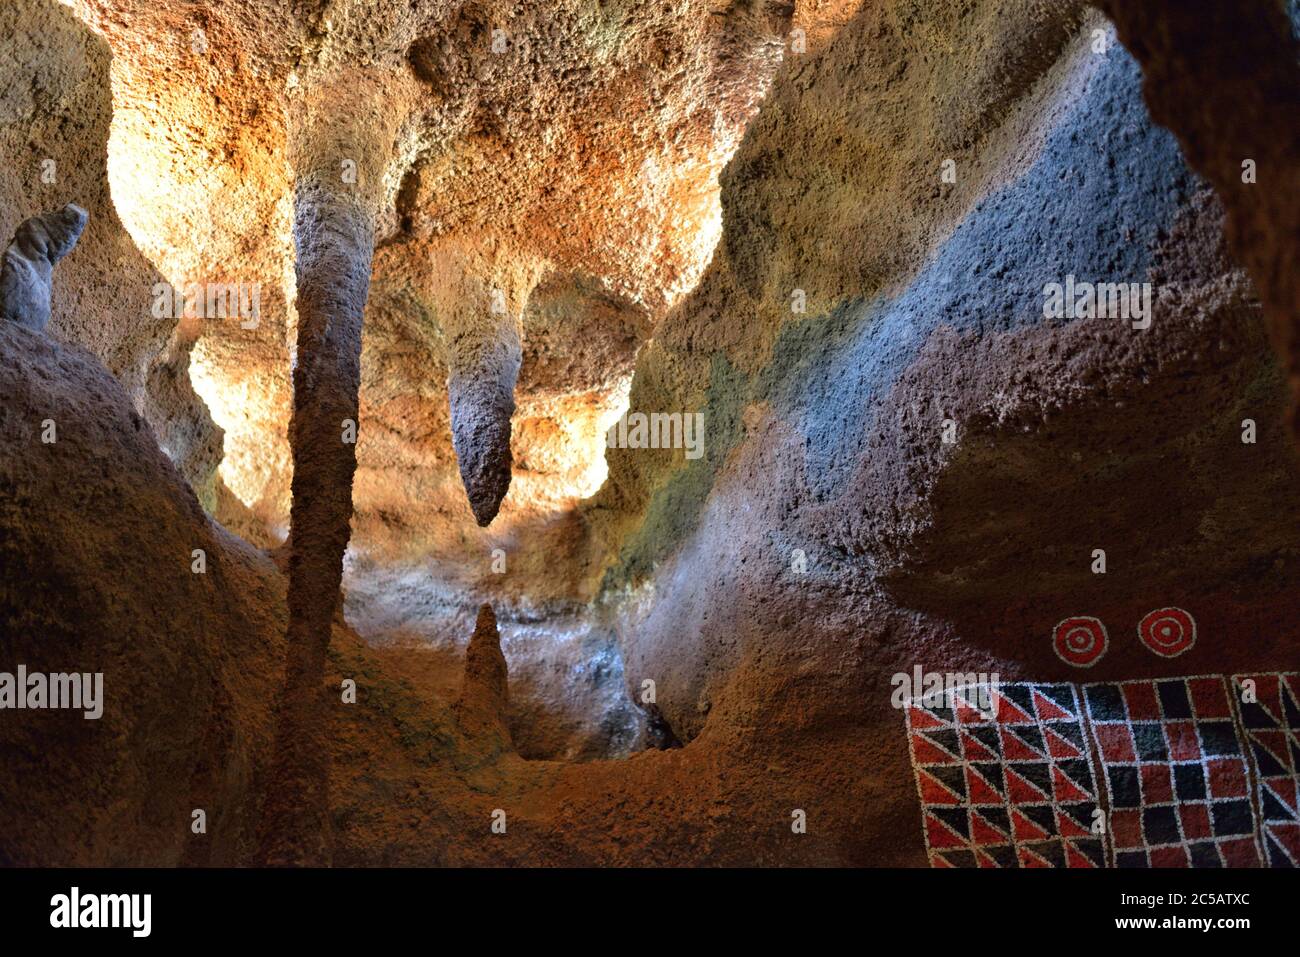 Cave habitat of natives guanche of Canary island.  Pintaderas Canarias is symbol by excellence used guanche for body and home decoration. Public archa Stock Photo